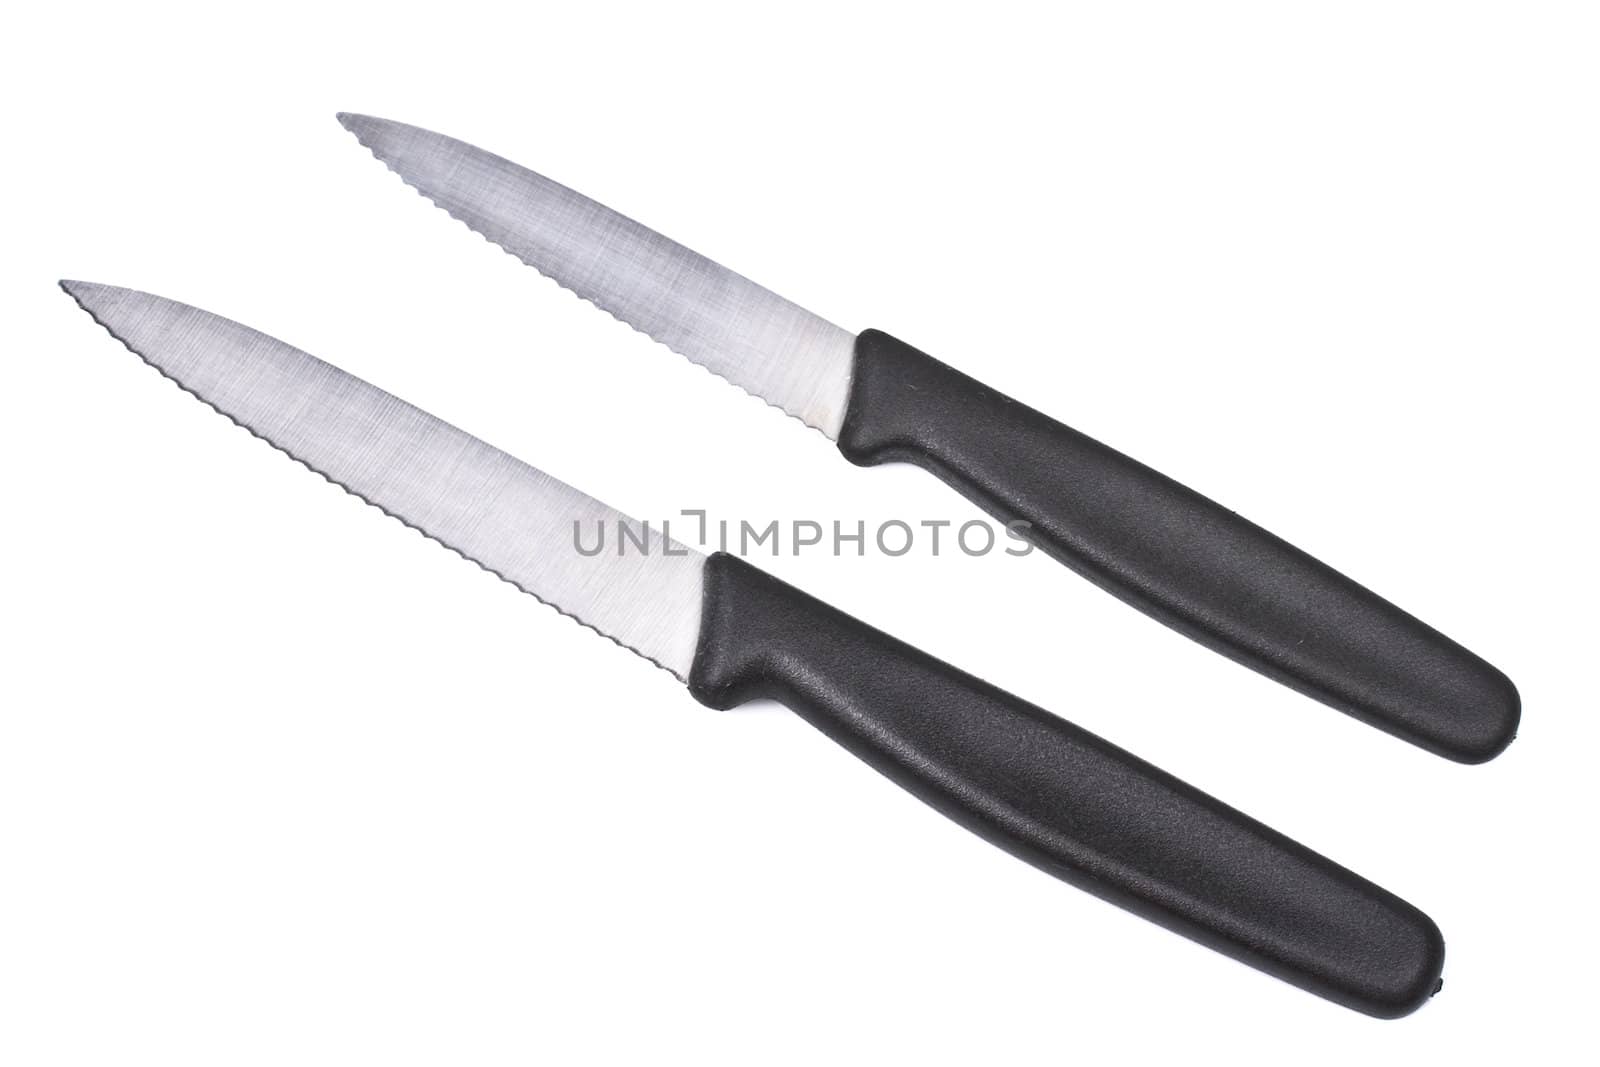 Two kitchen knives isolated on white  by dimol